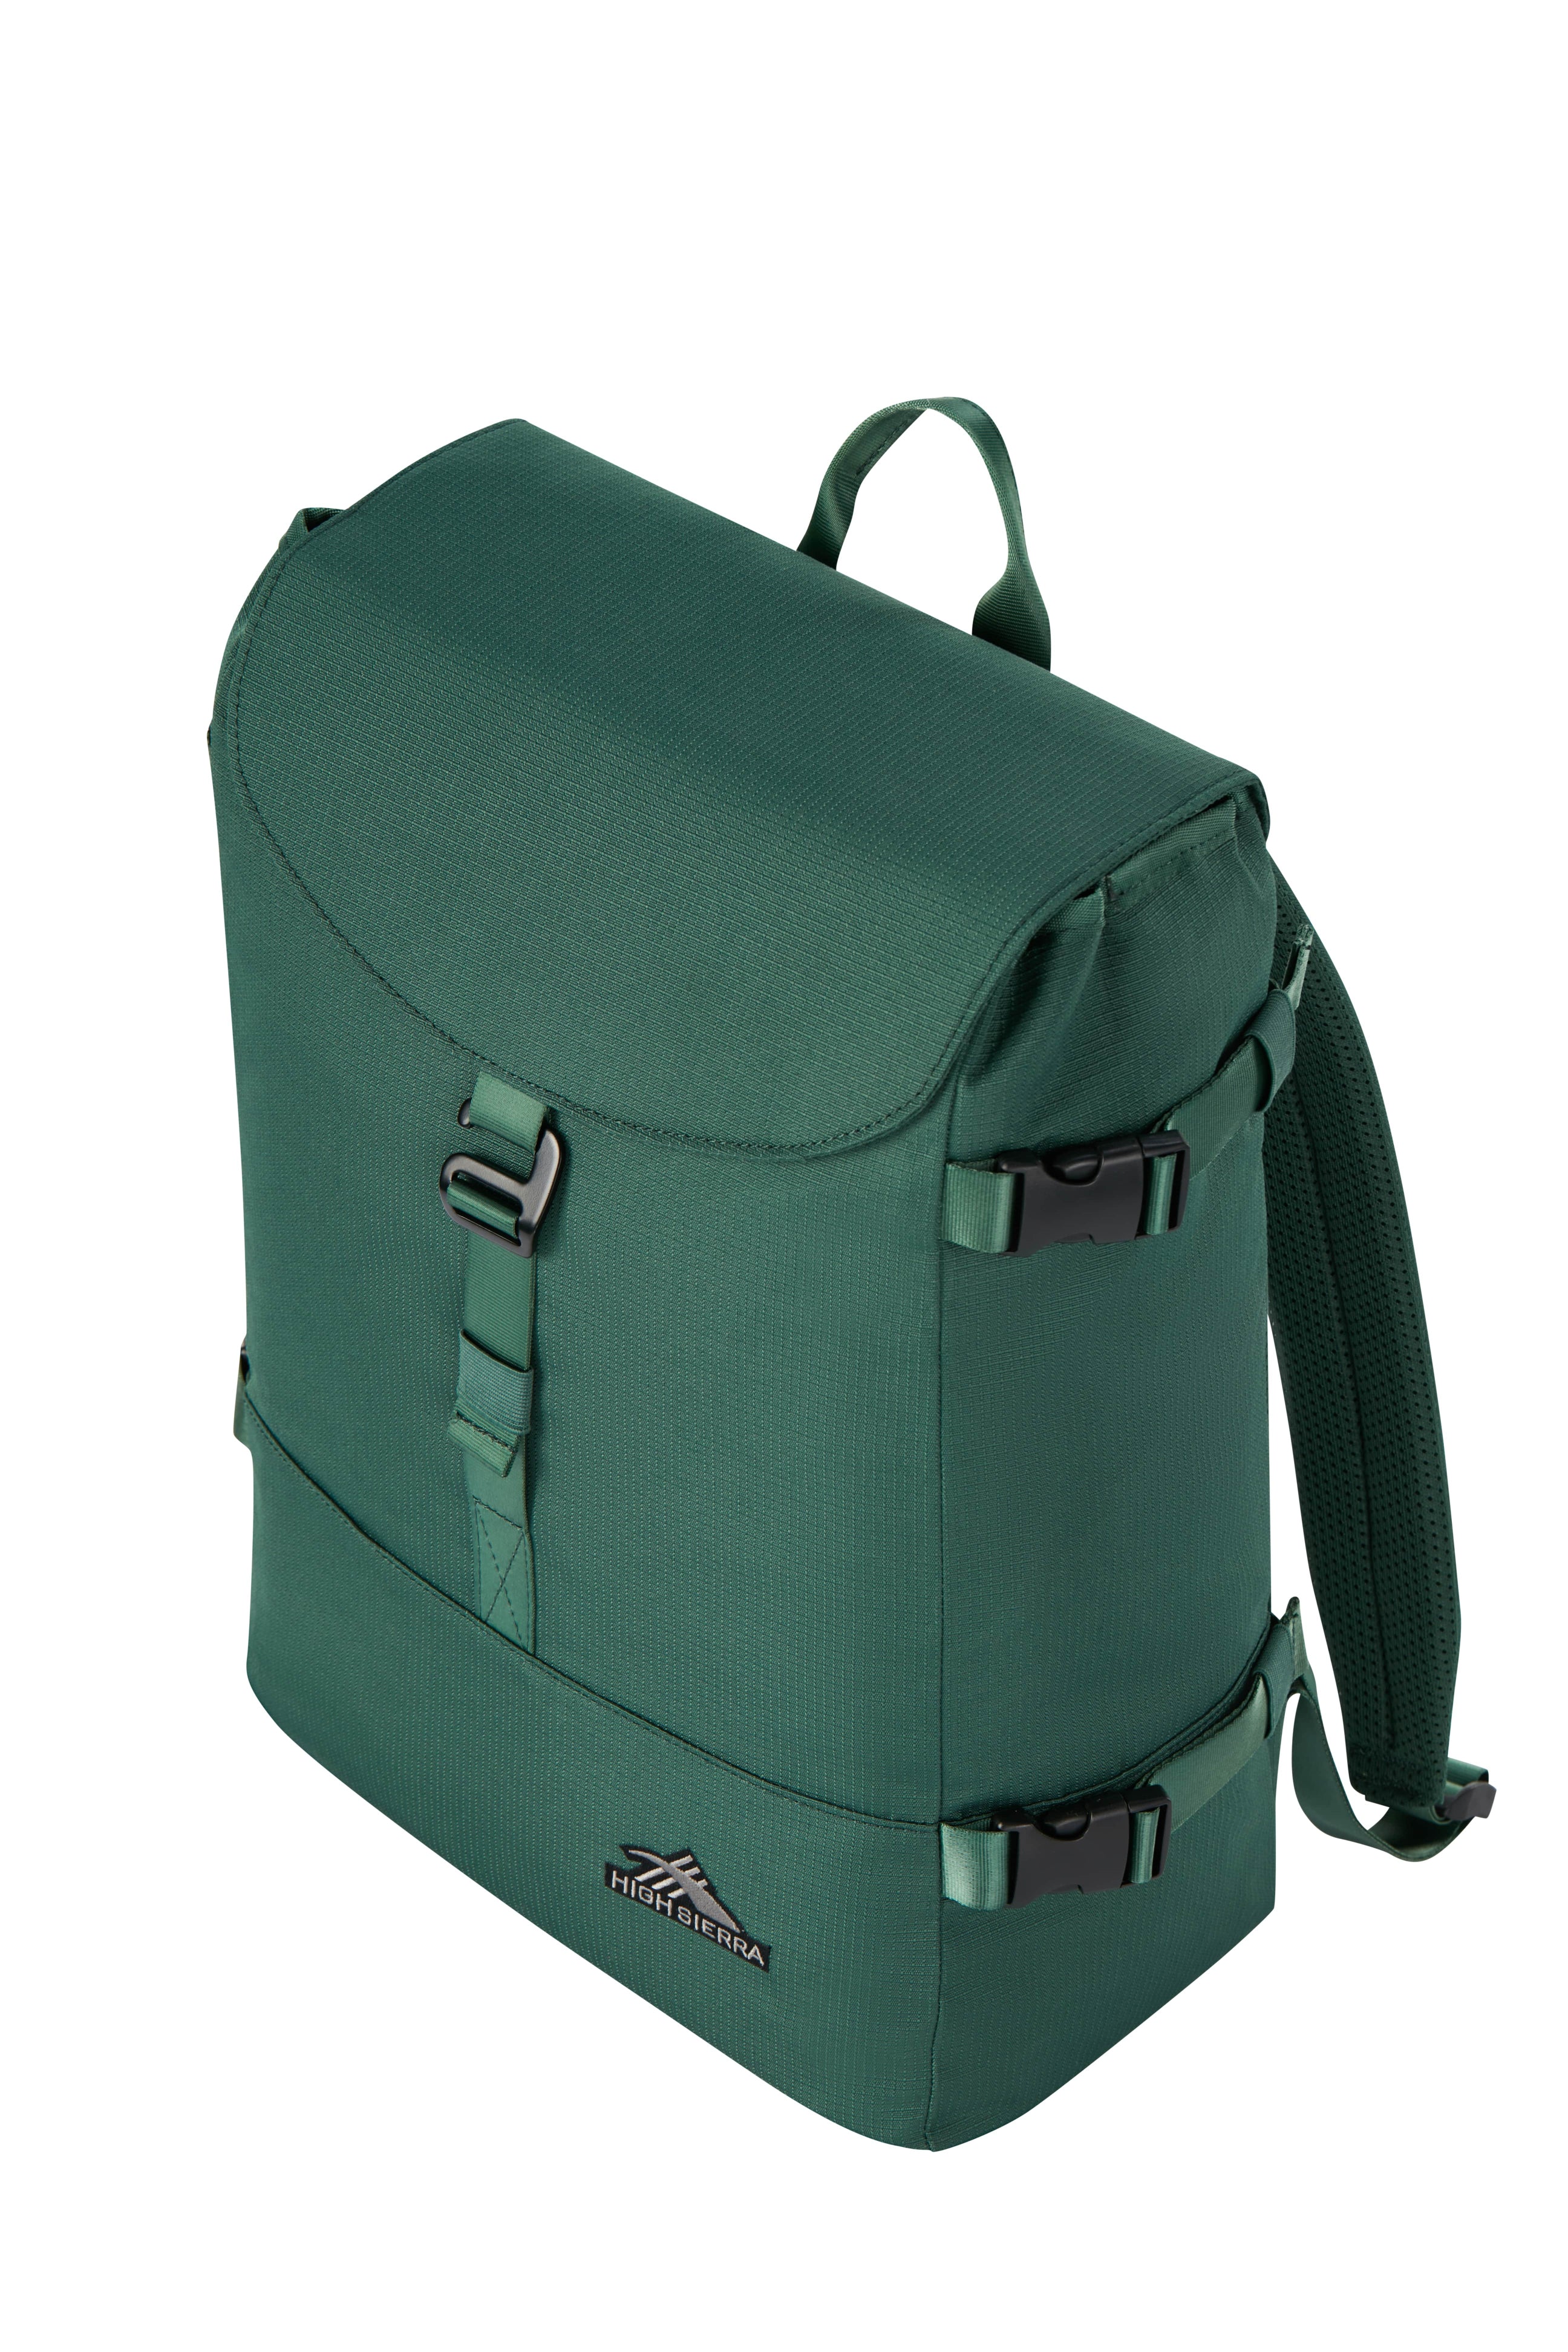 High Sierra - Camille 20L 15.6in Laptop backpack - Green-8